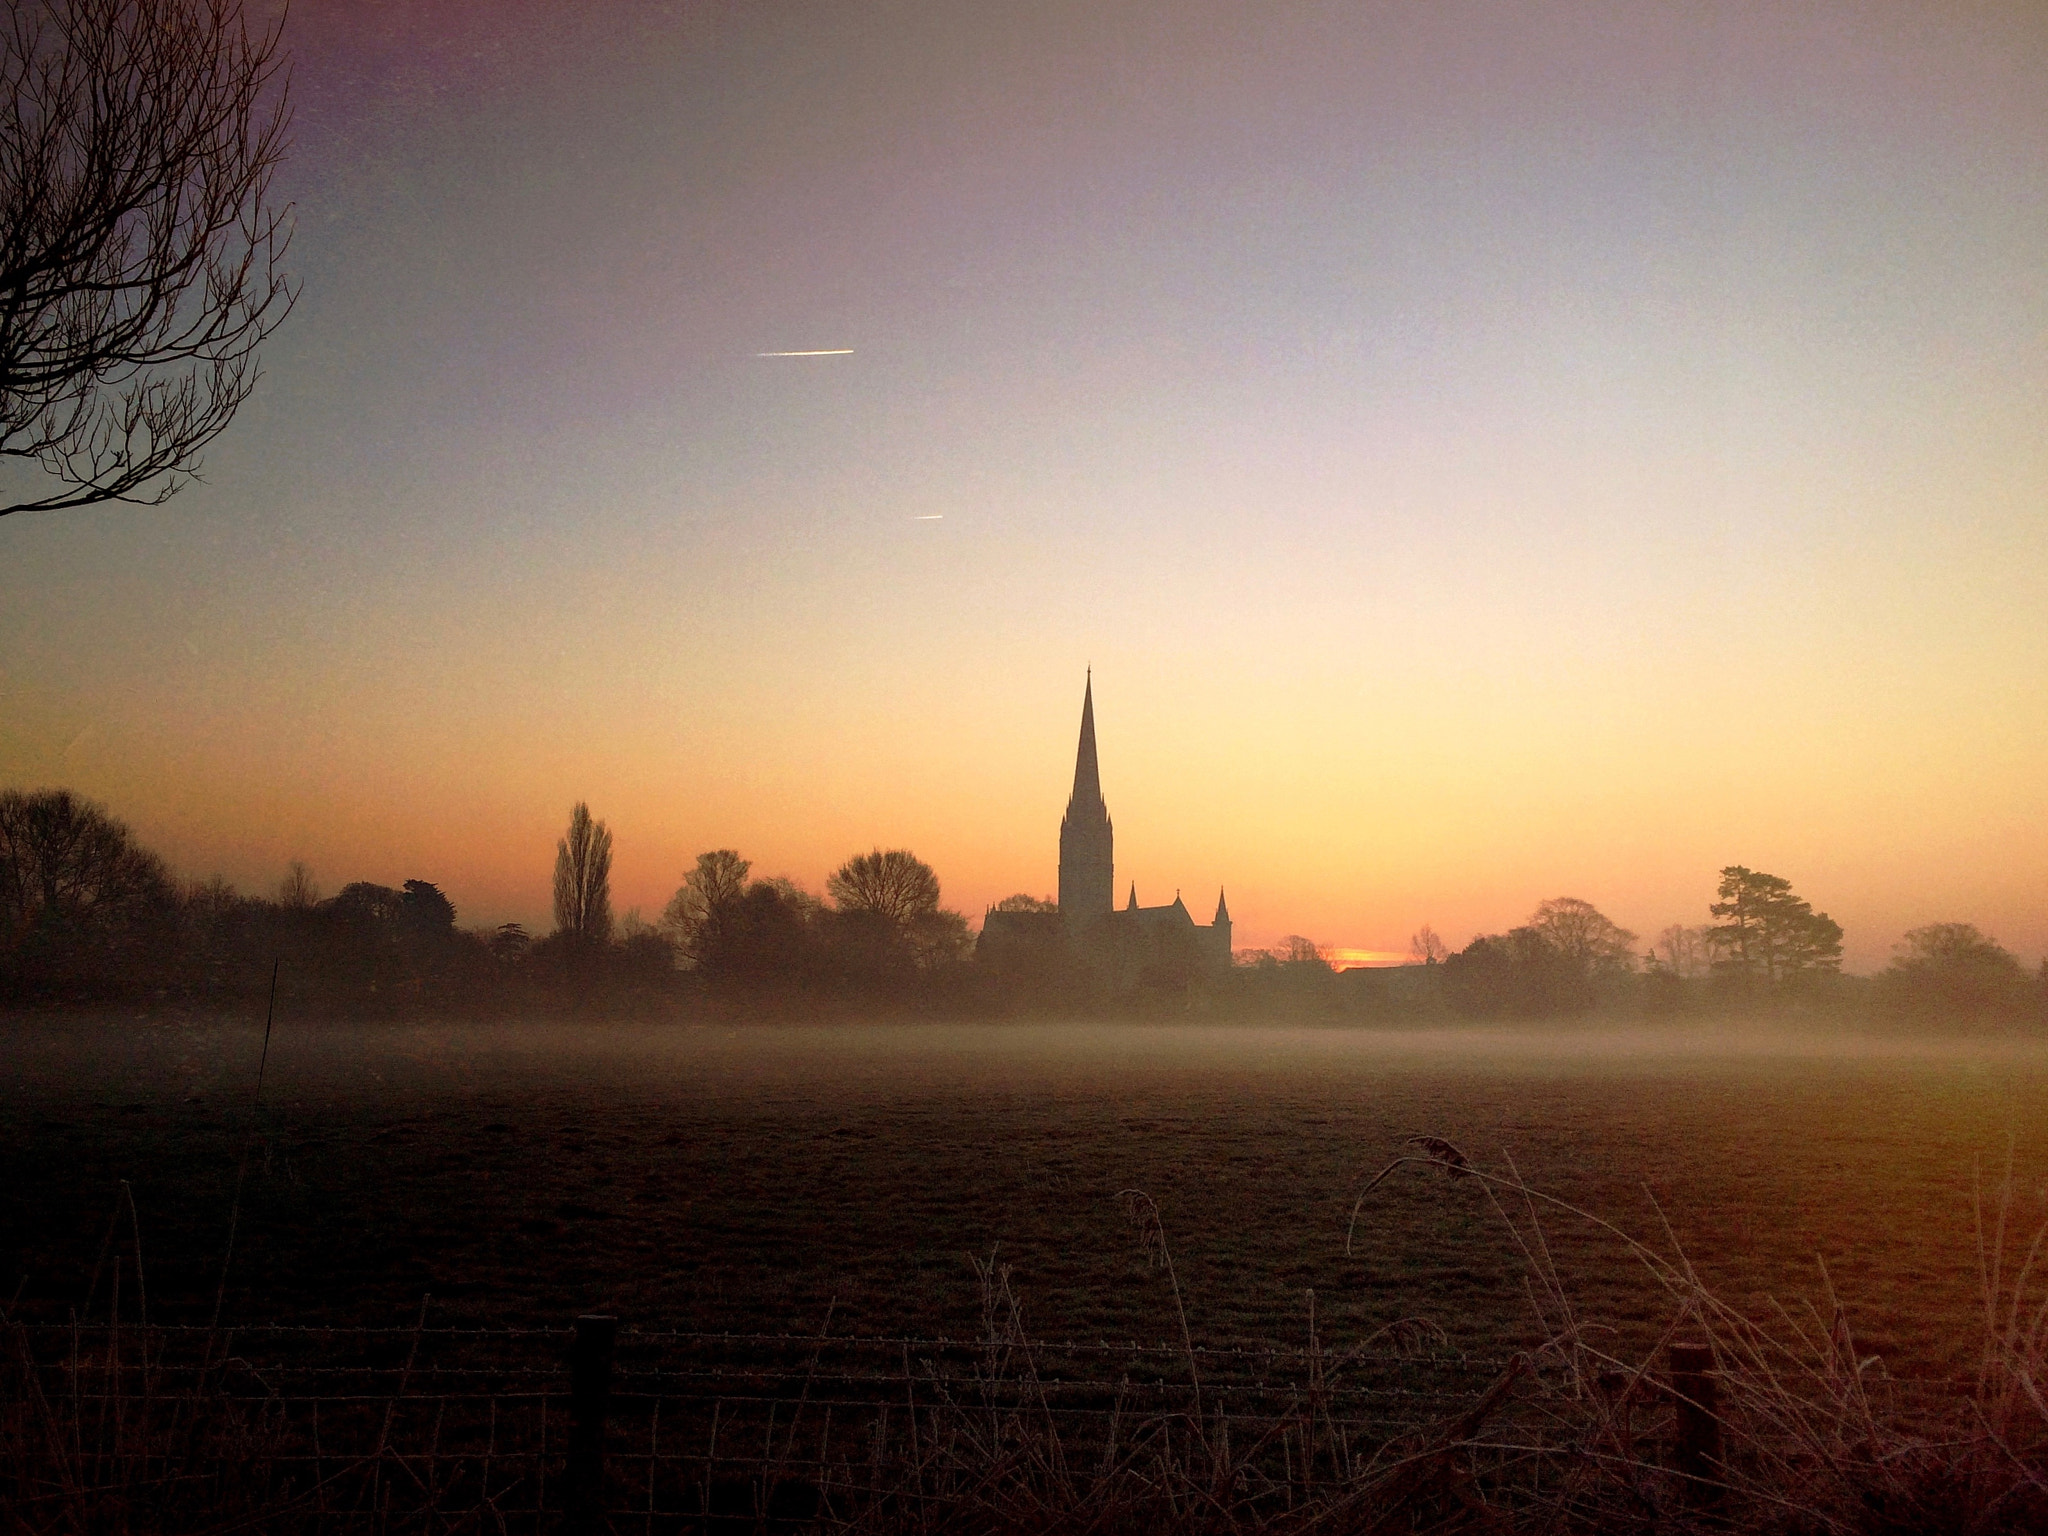 Jag.gr 645 PRO Mk III for Apple iPhone 5s sample photo. Salisbury cathedral at sunrise in january photography